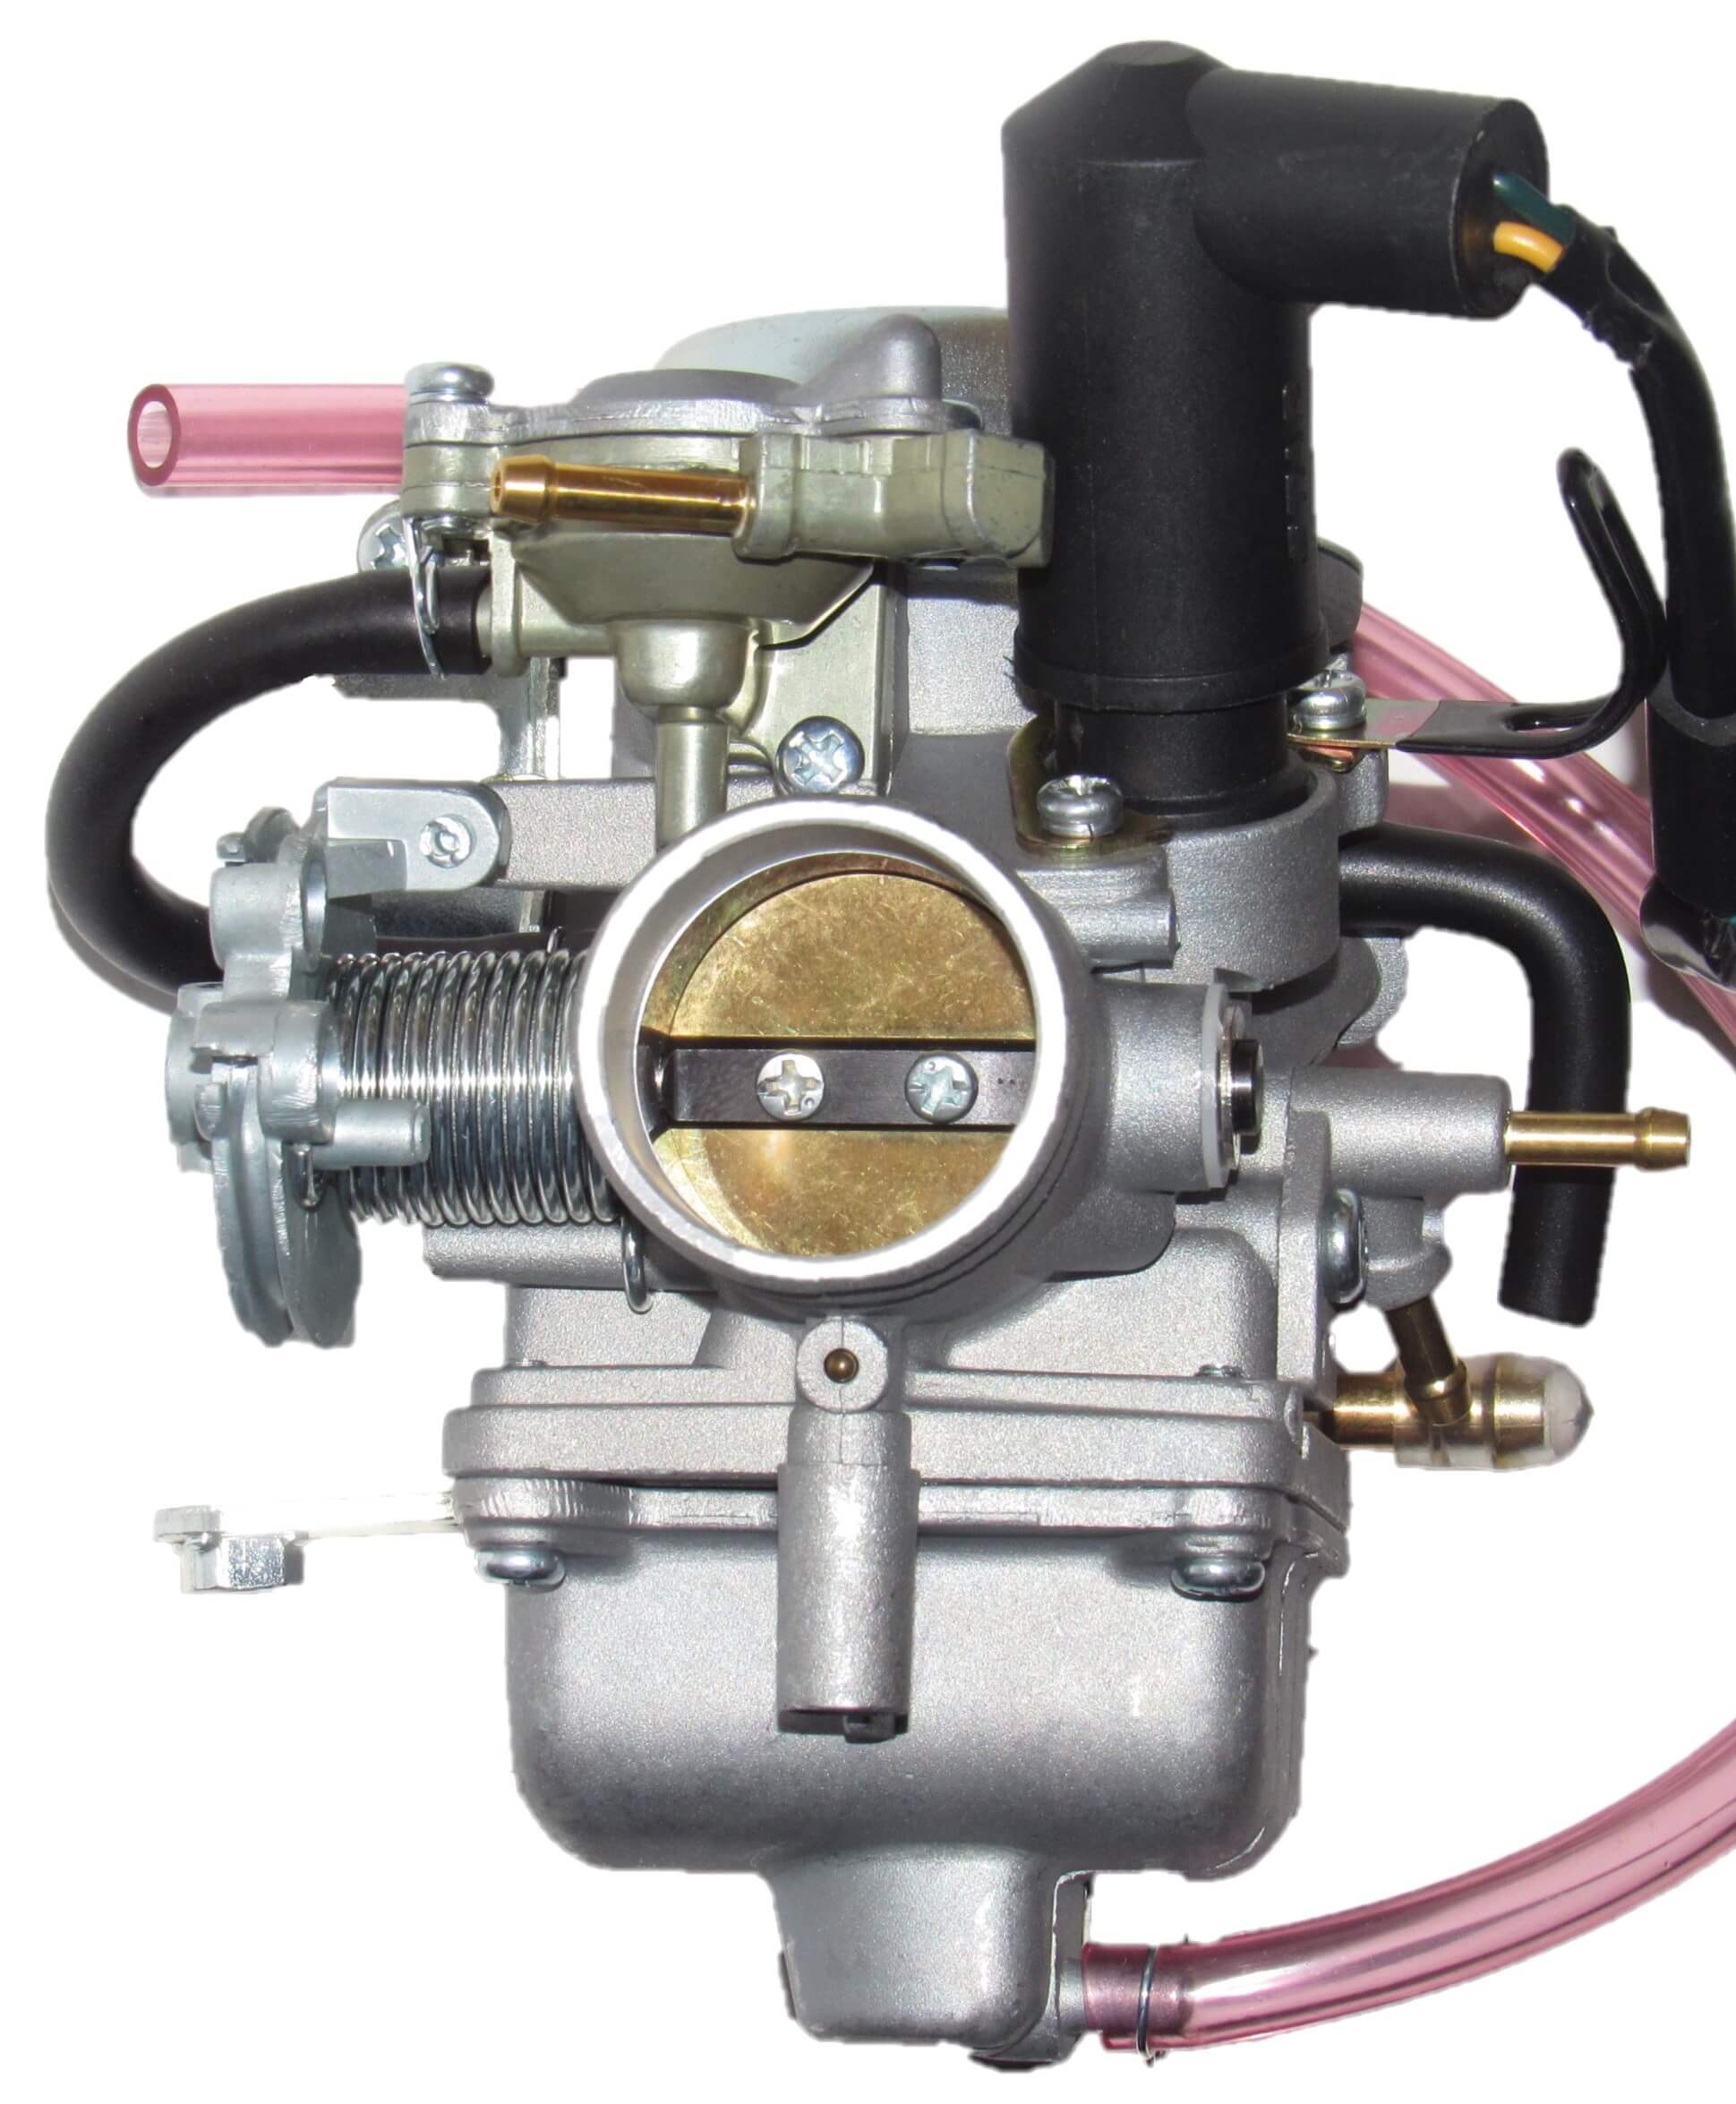 PD Carburetor with Electric choke for GY6 250-300cc ATVs and Scooter